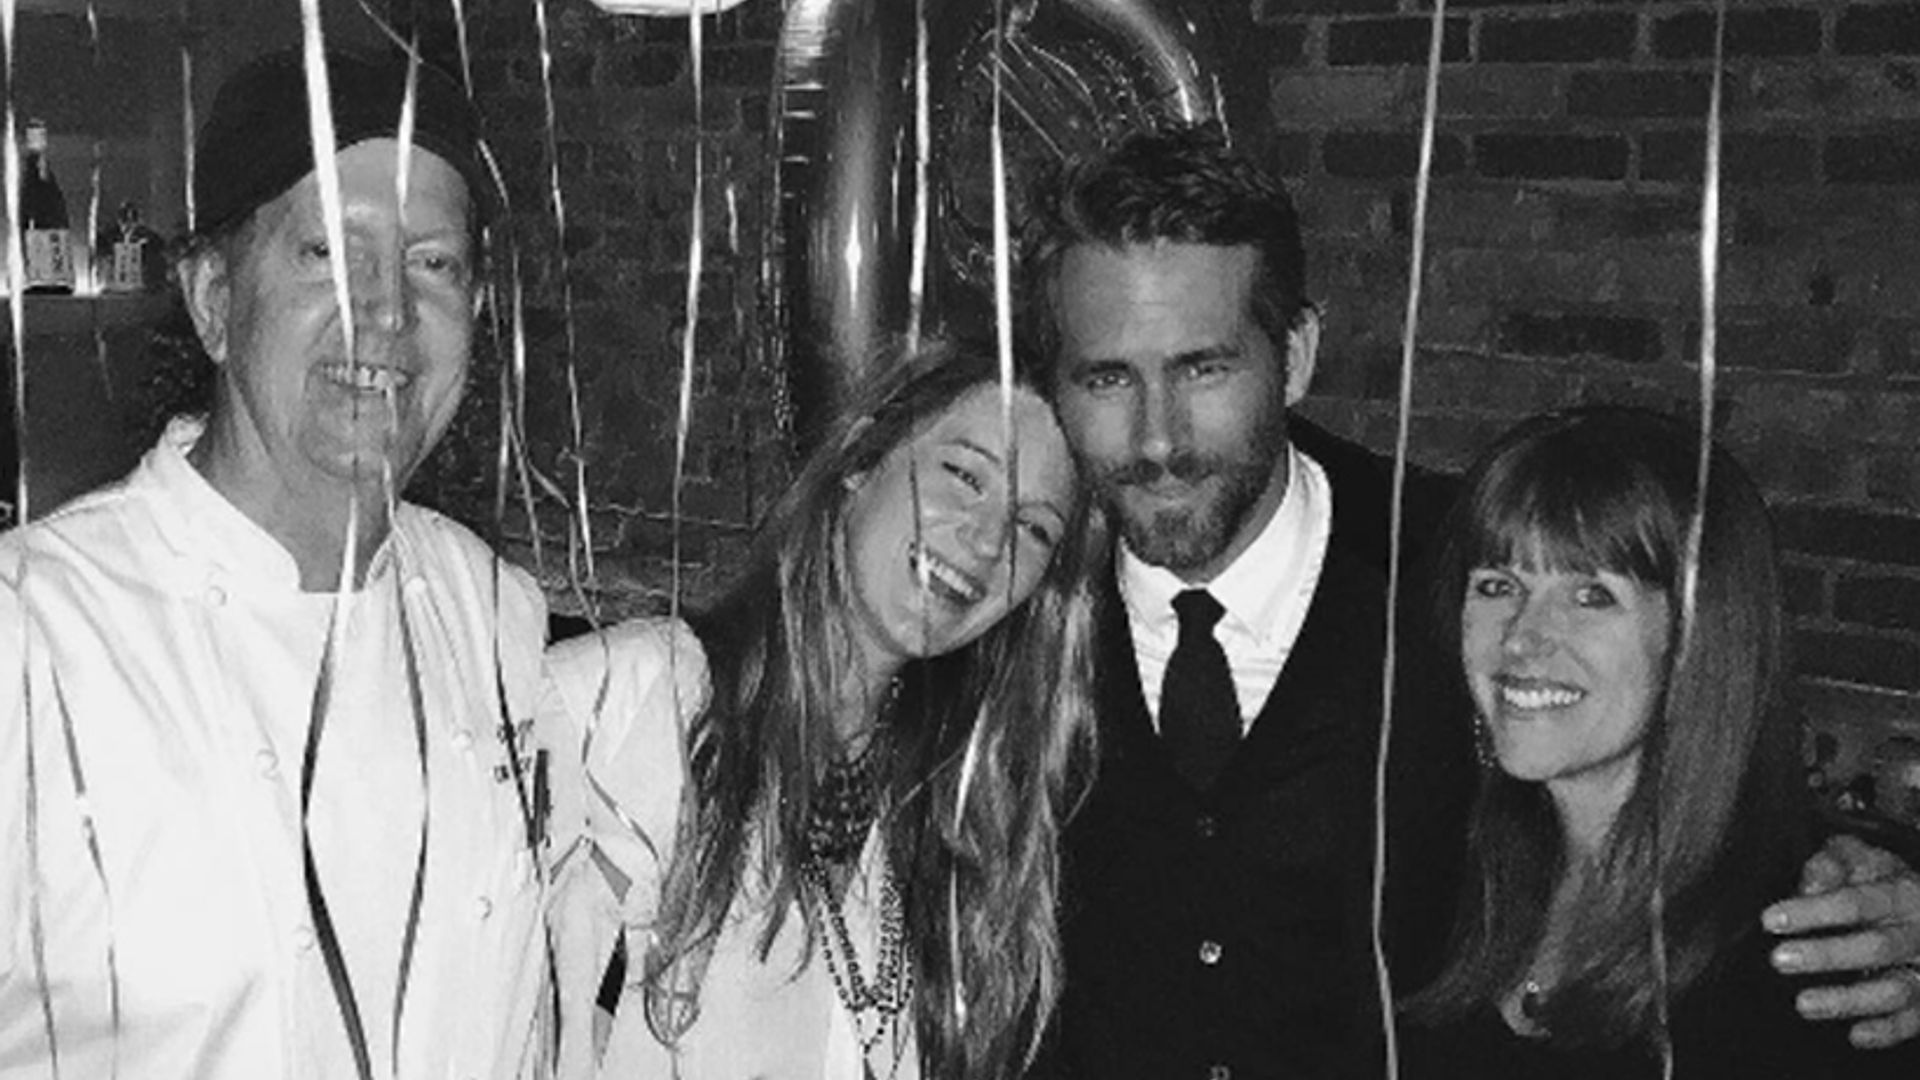 Blake Lively throws surprise birthday party for Ryan Reynolds in place they 'fell in love'